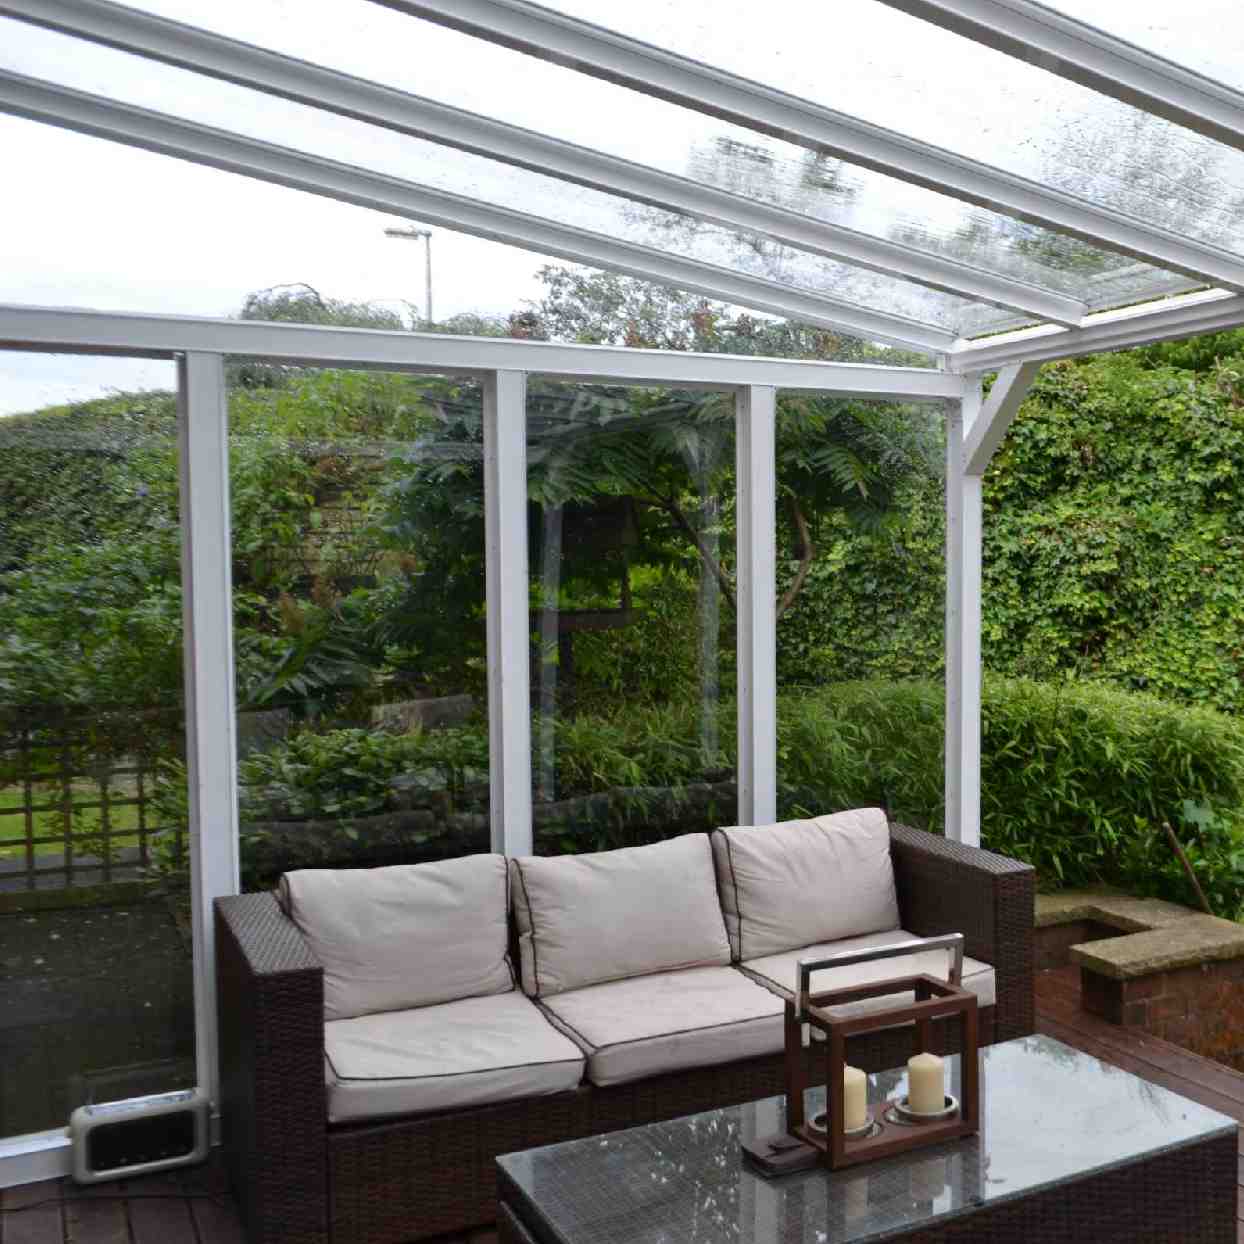 Buy Omega Verandah White with 16mm Polycarbonate Glazing - 10.6m (W) x 2.0m (P), (5) Supporting Posts online today